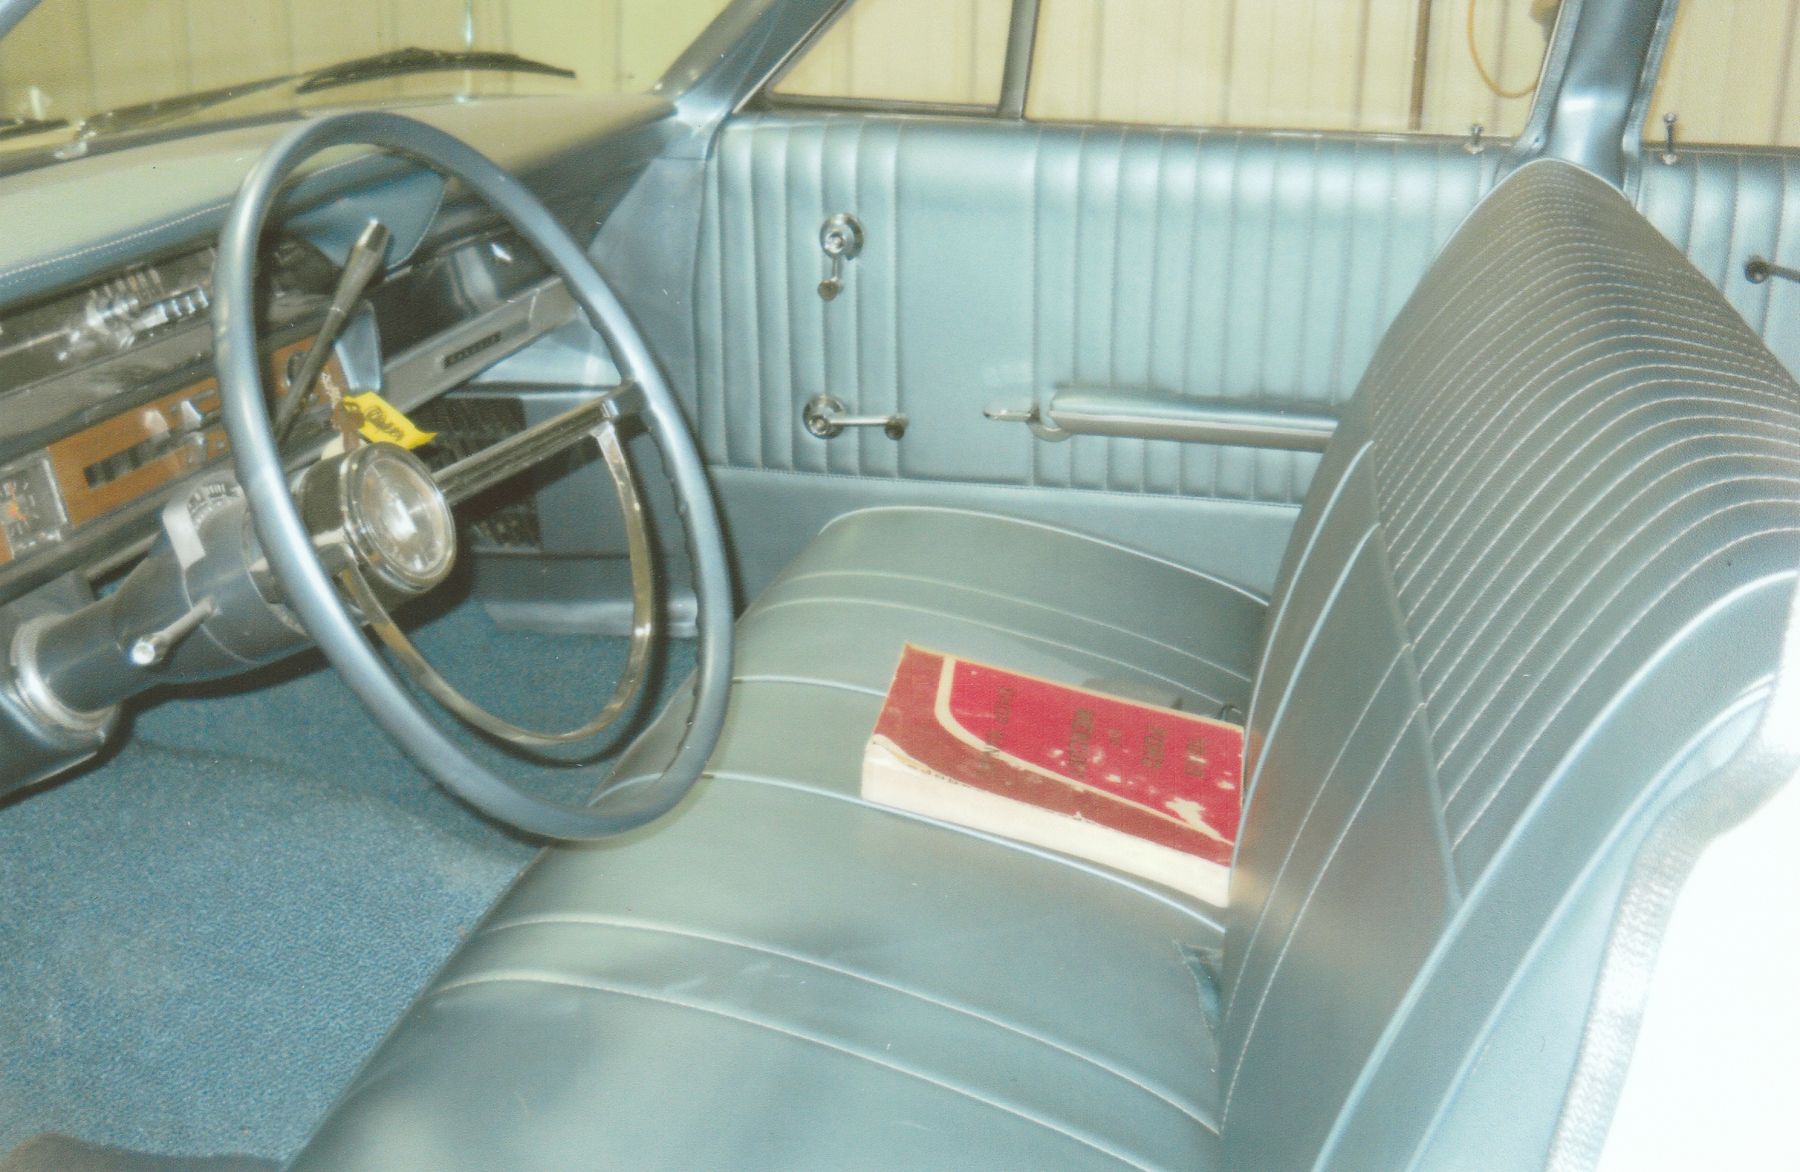 1966 Ford Galaxie 500 front seat and interior dash